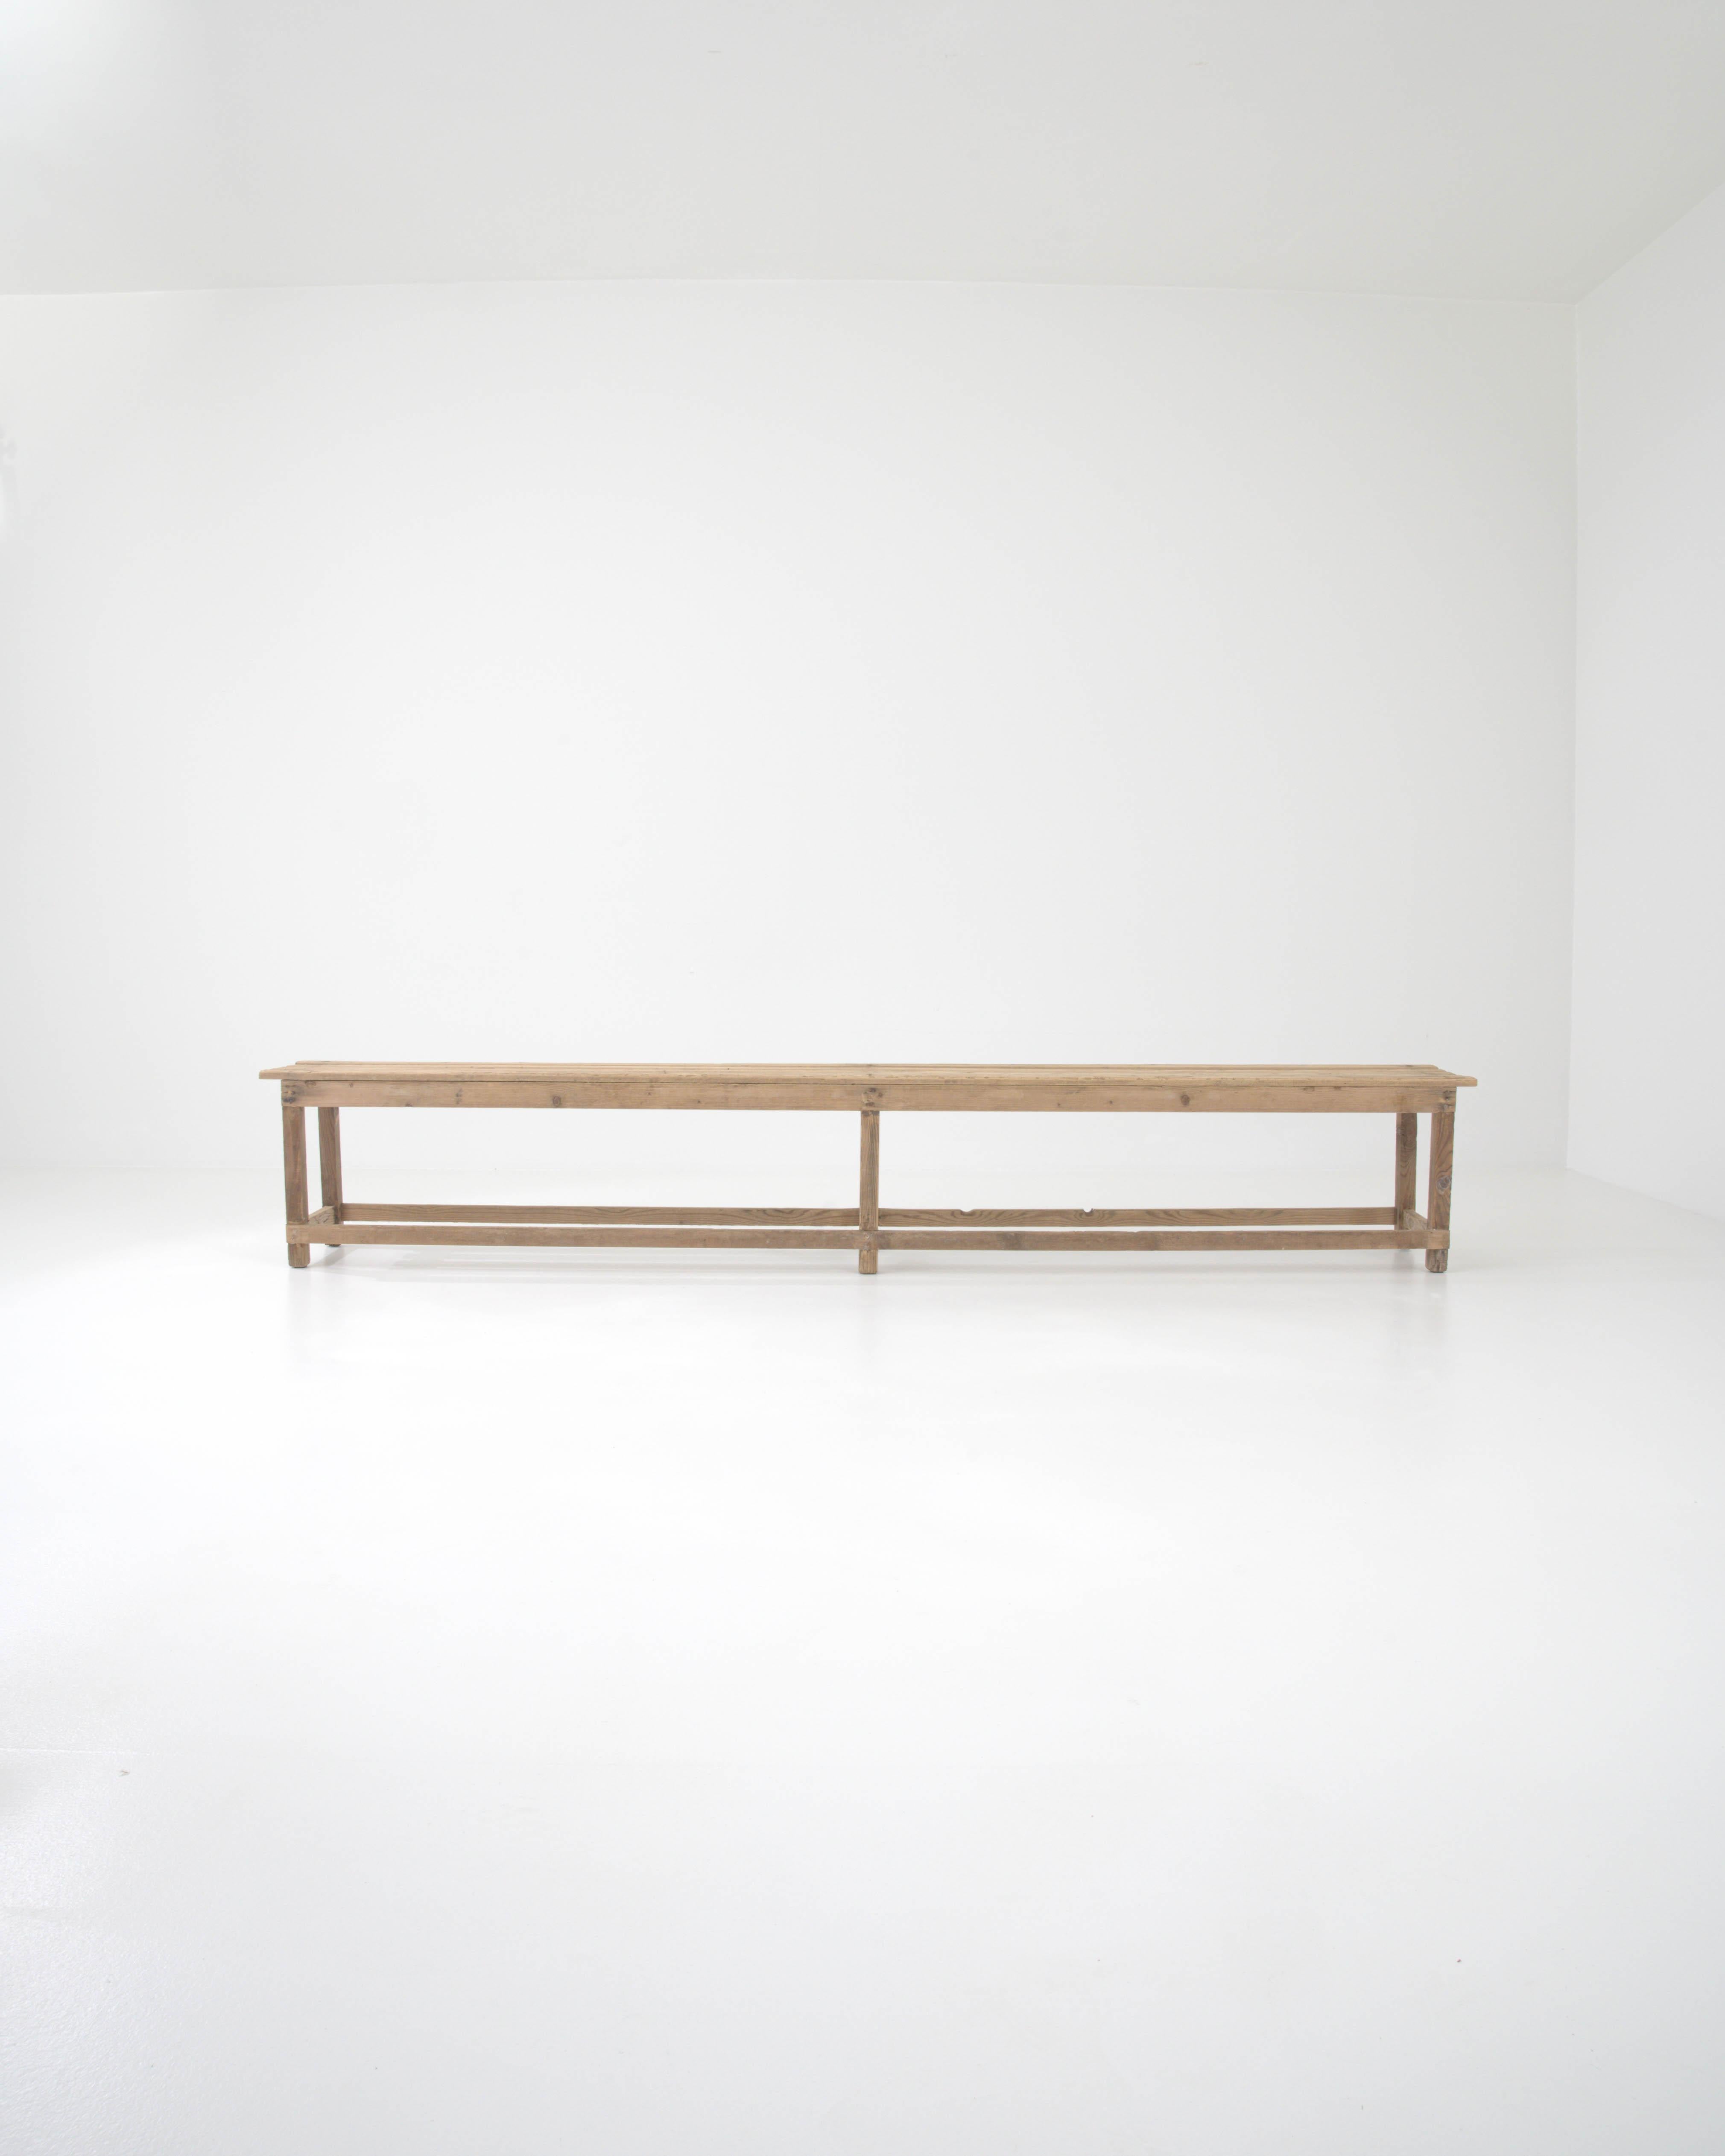 A wooden bench made in France circa 1900. A picture of country minimalism, this 10 foot long bench exemplifies both straightforward craftsmanship and the joy of simple, vernacular design. Long and slender, it offers extensive surface space, but not